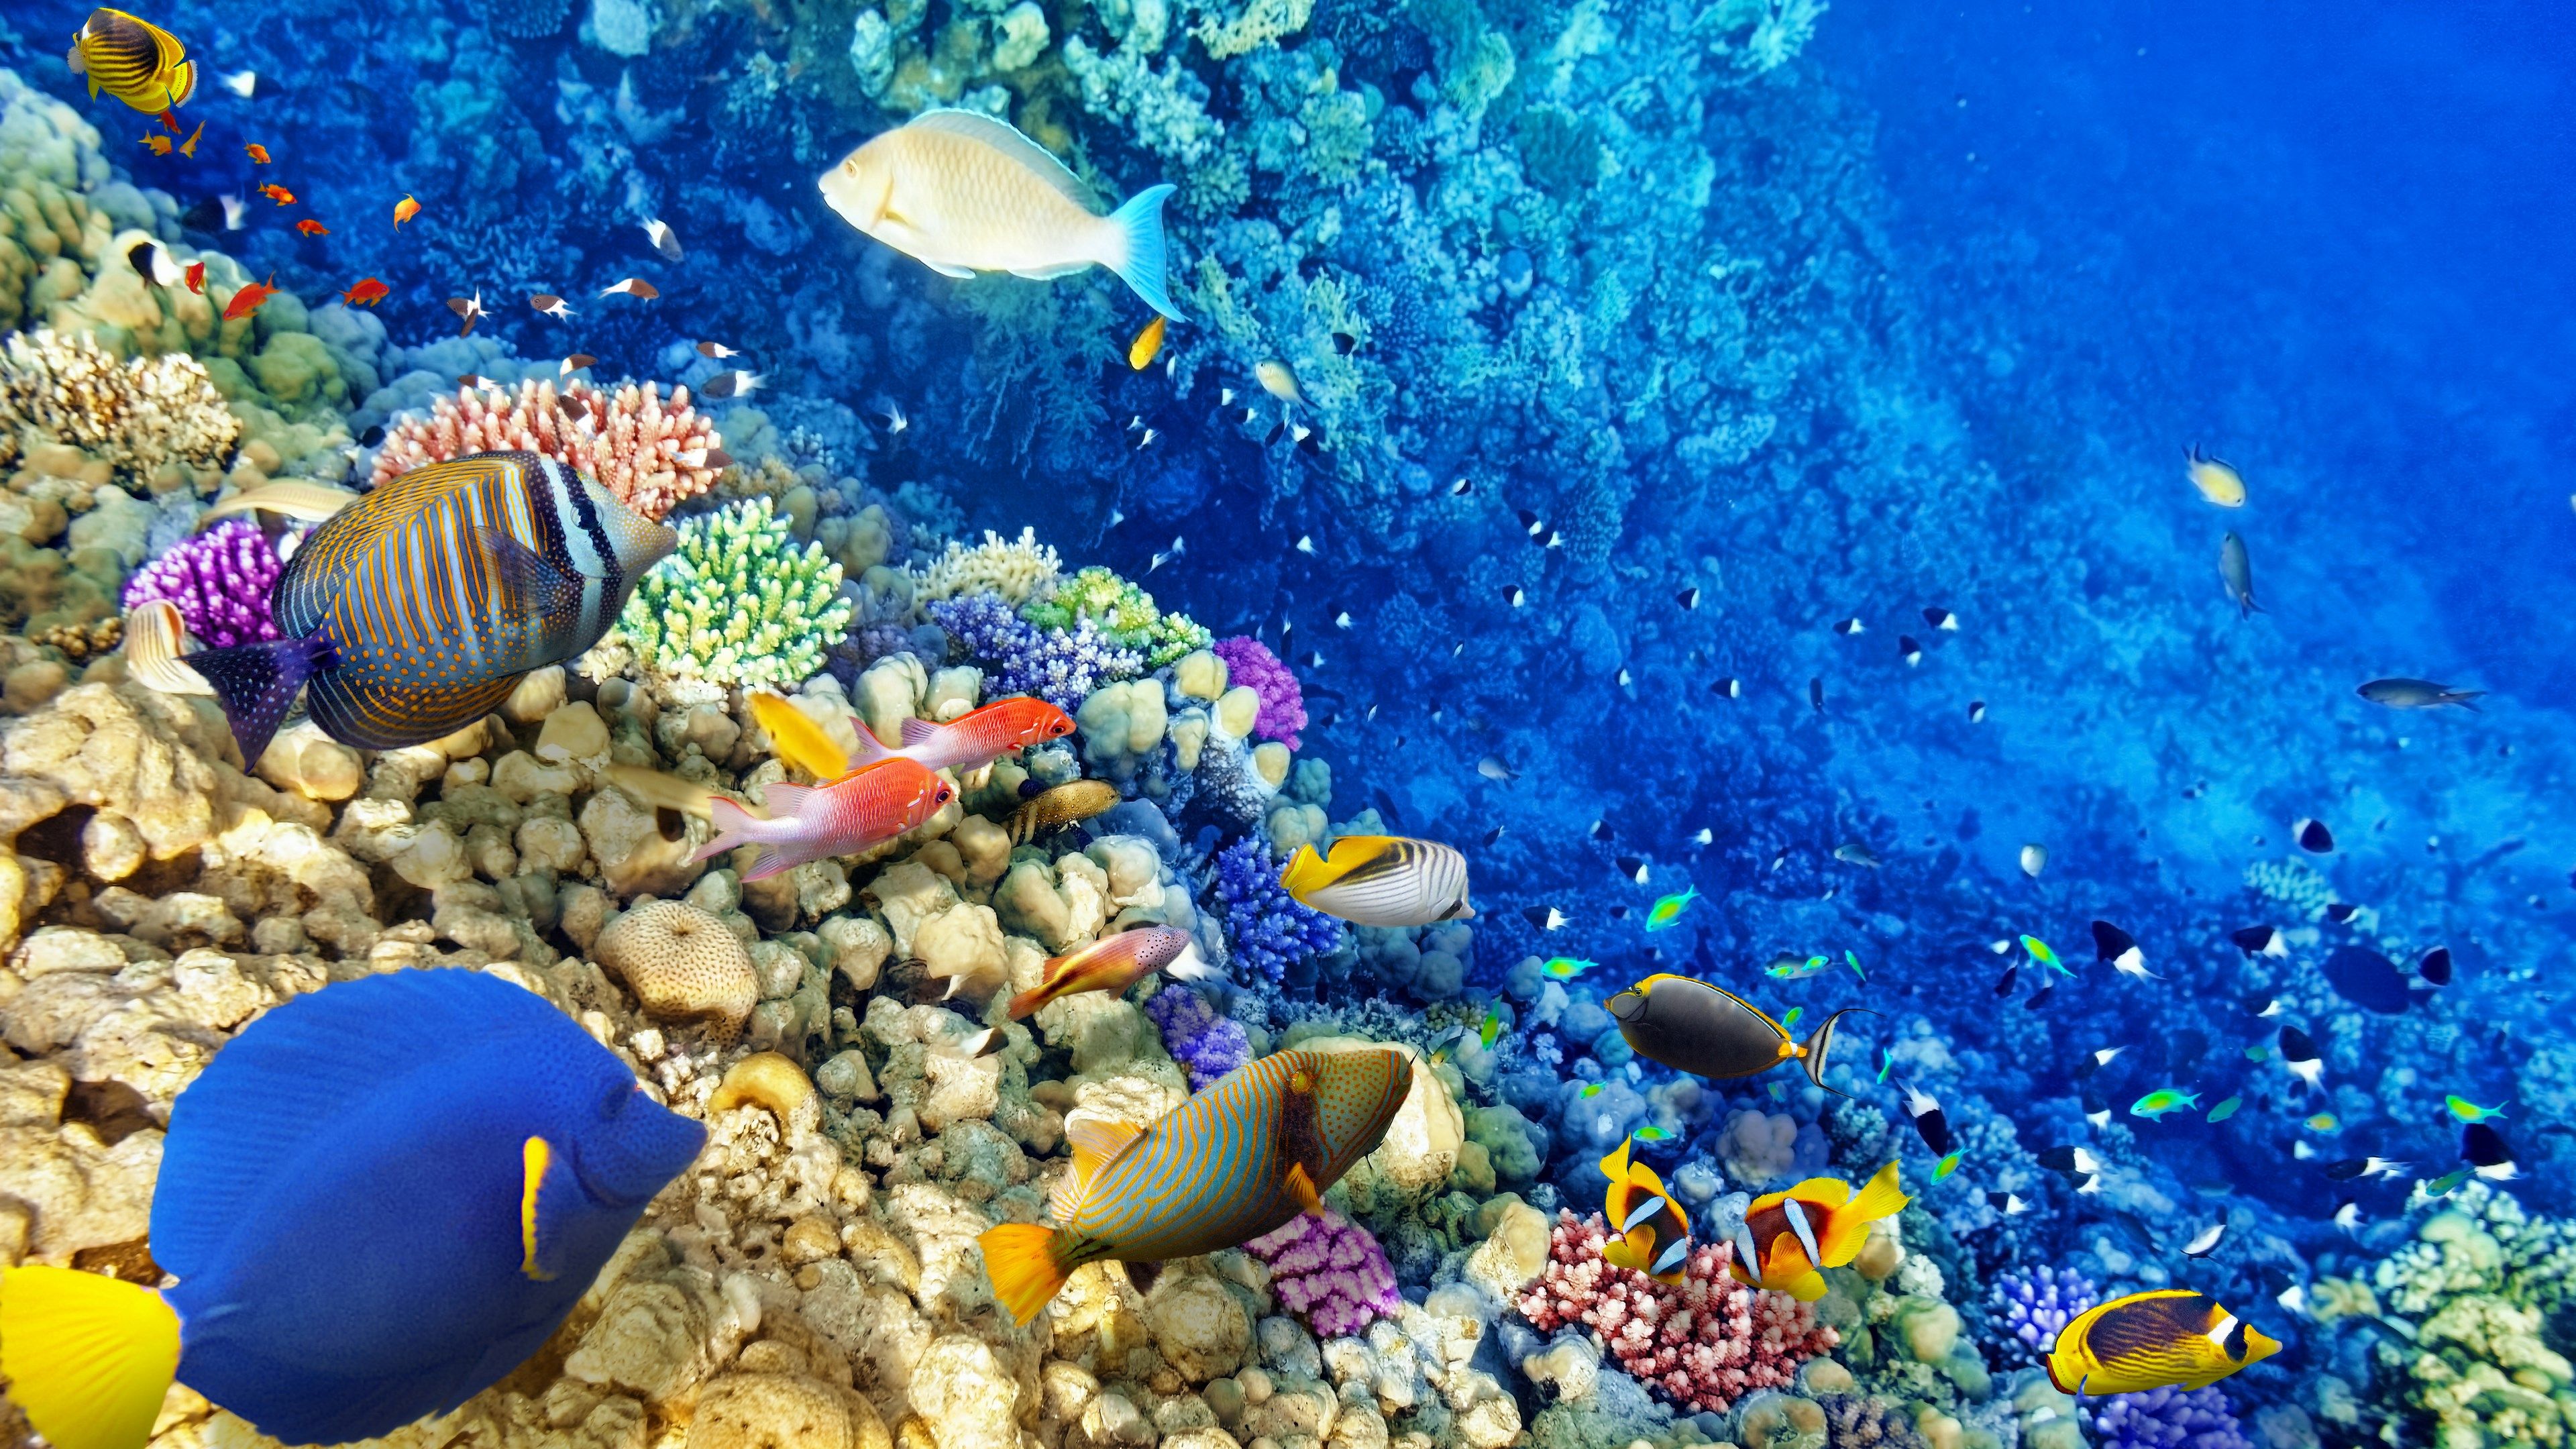 Abstract Coral Reef Wallpapers